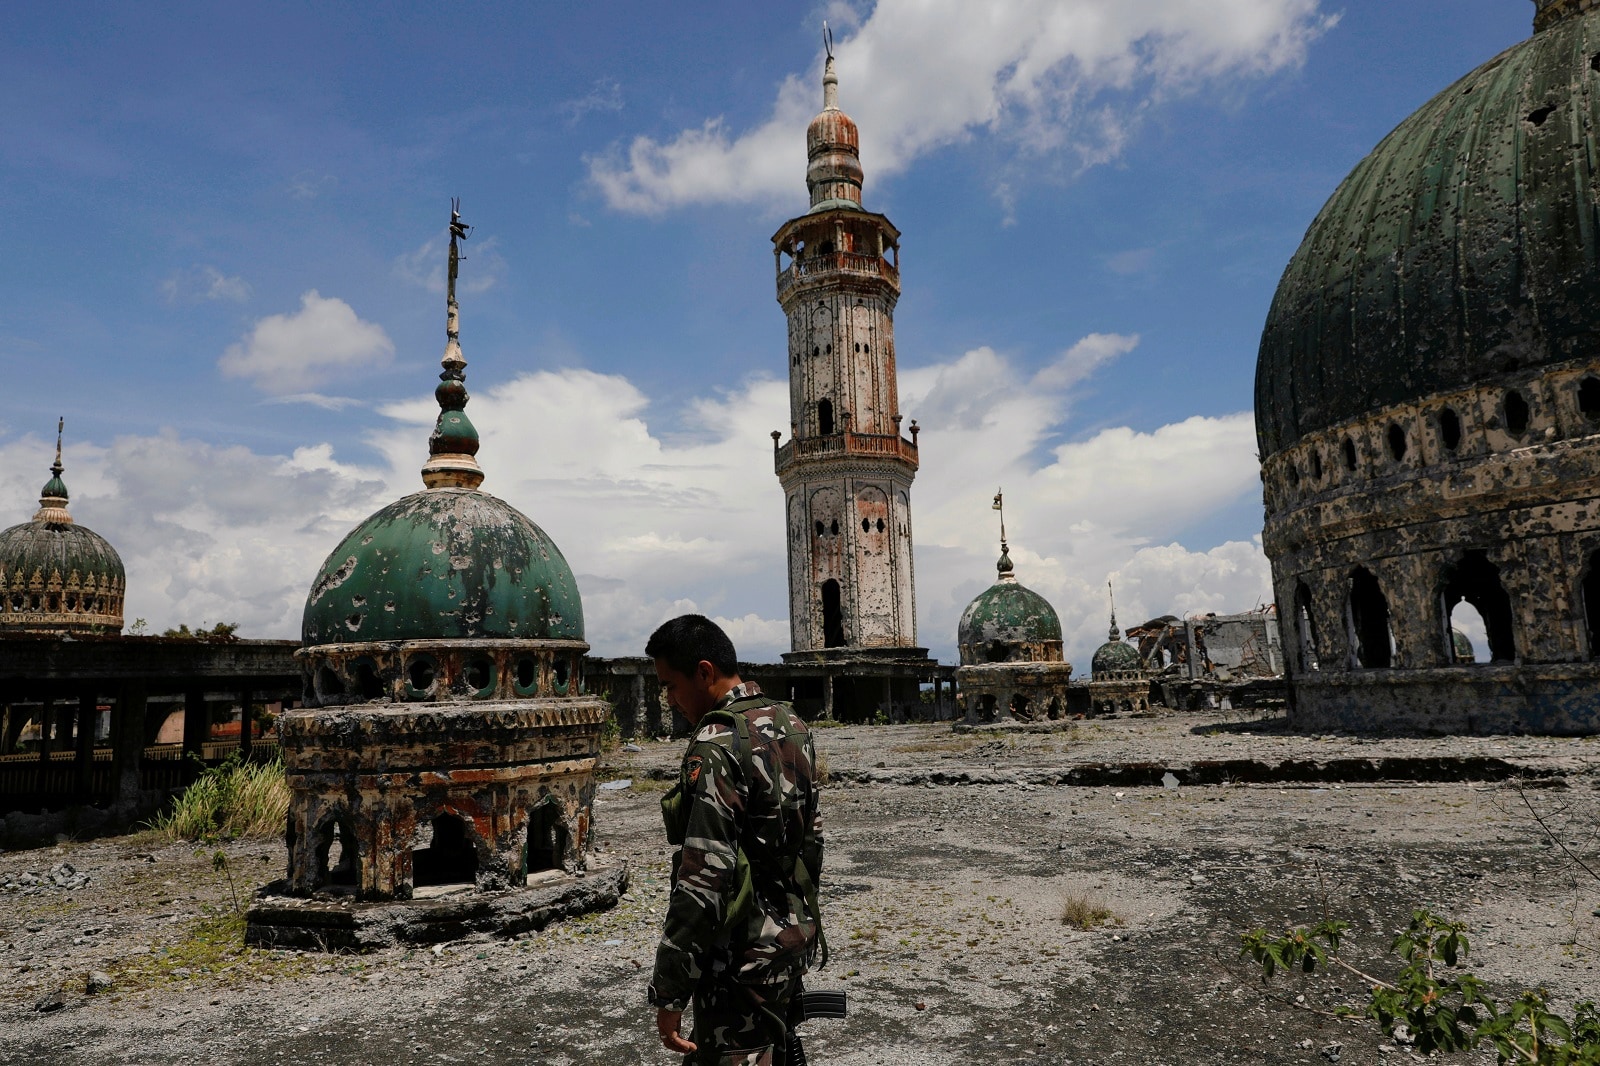 10. The Philippines: The South-East Asian nation has been hit hard by terrorism owing mainly due to the Moro conflict that has pitted Islamists against the Manila-based central authority. (REUTERS/Eloisa Lopez)